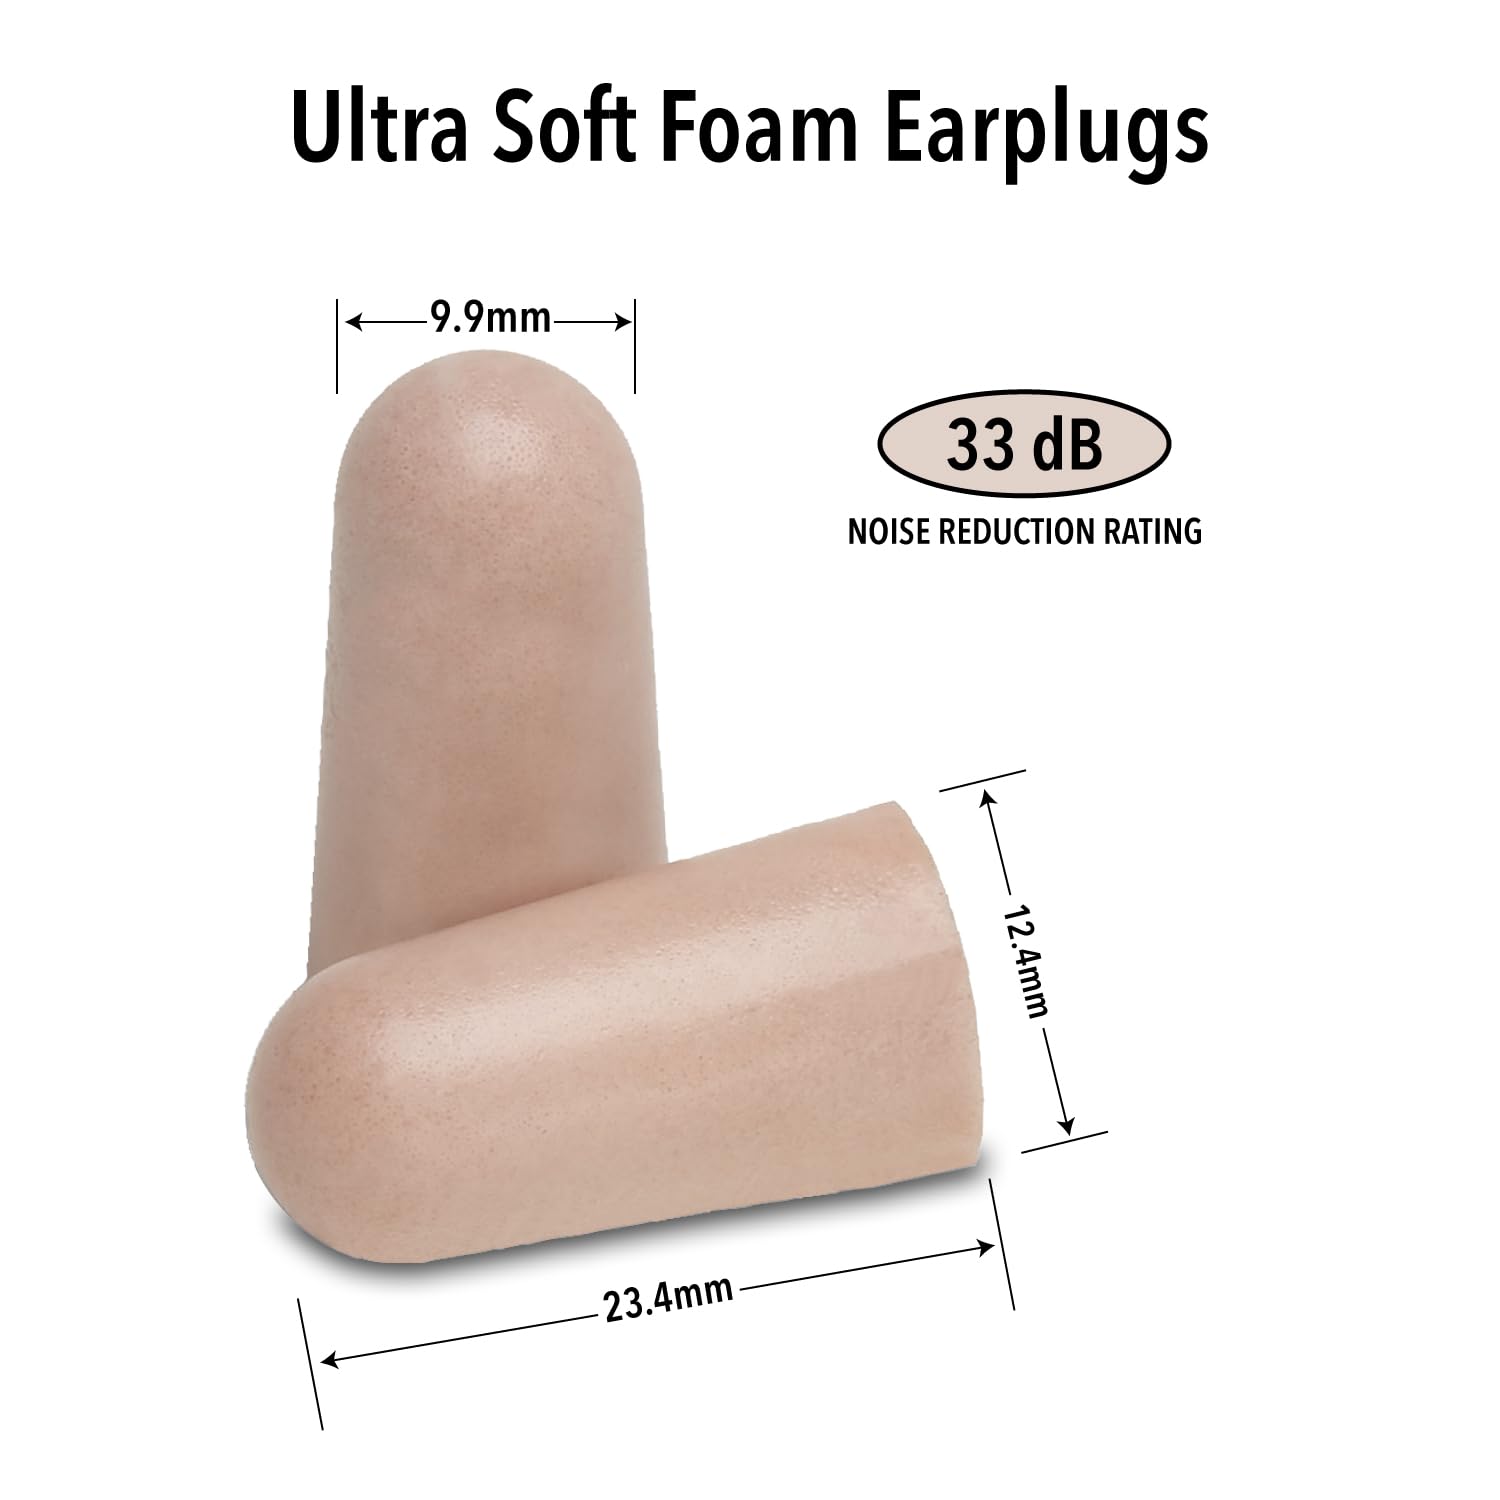 Mack's Ultra Soft Foam Earplugs, 50 Pair - 33dB Highest NRR, Comfortable Ear Plugs for Sleeping, Snoring, Travel, Concerts, Studying, Loud Noise, Work | Made in USA